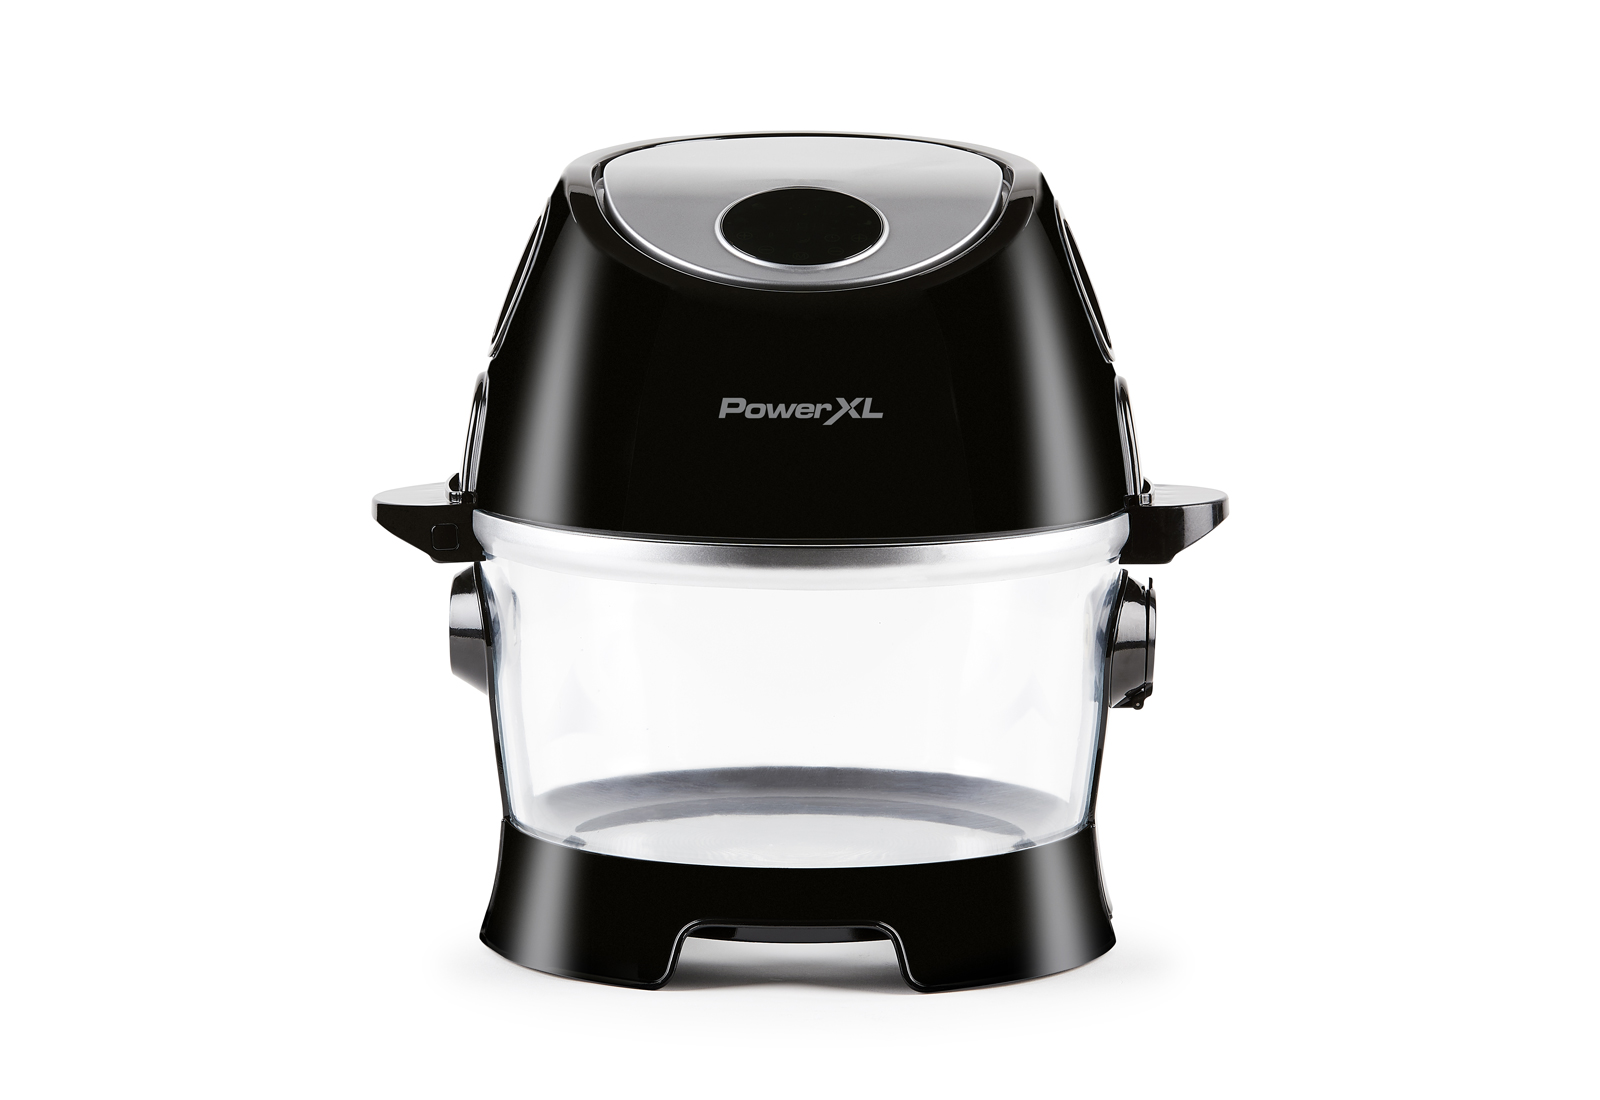 PowerXL Turbo Air Fryer Product Image